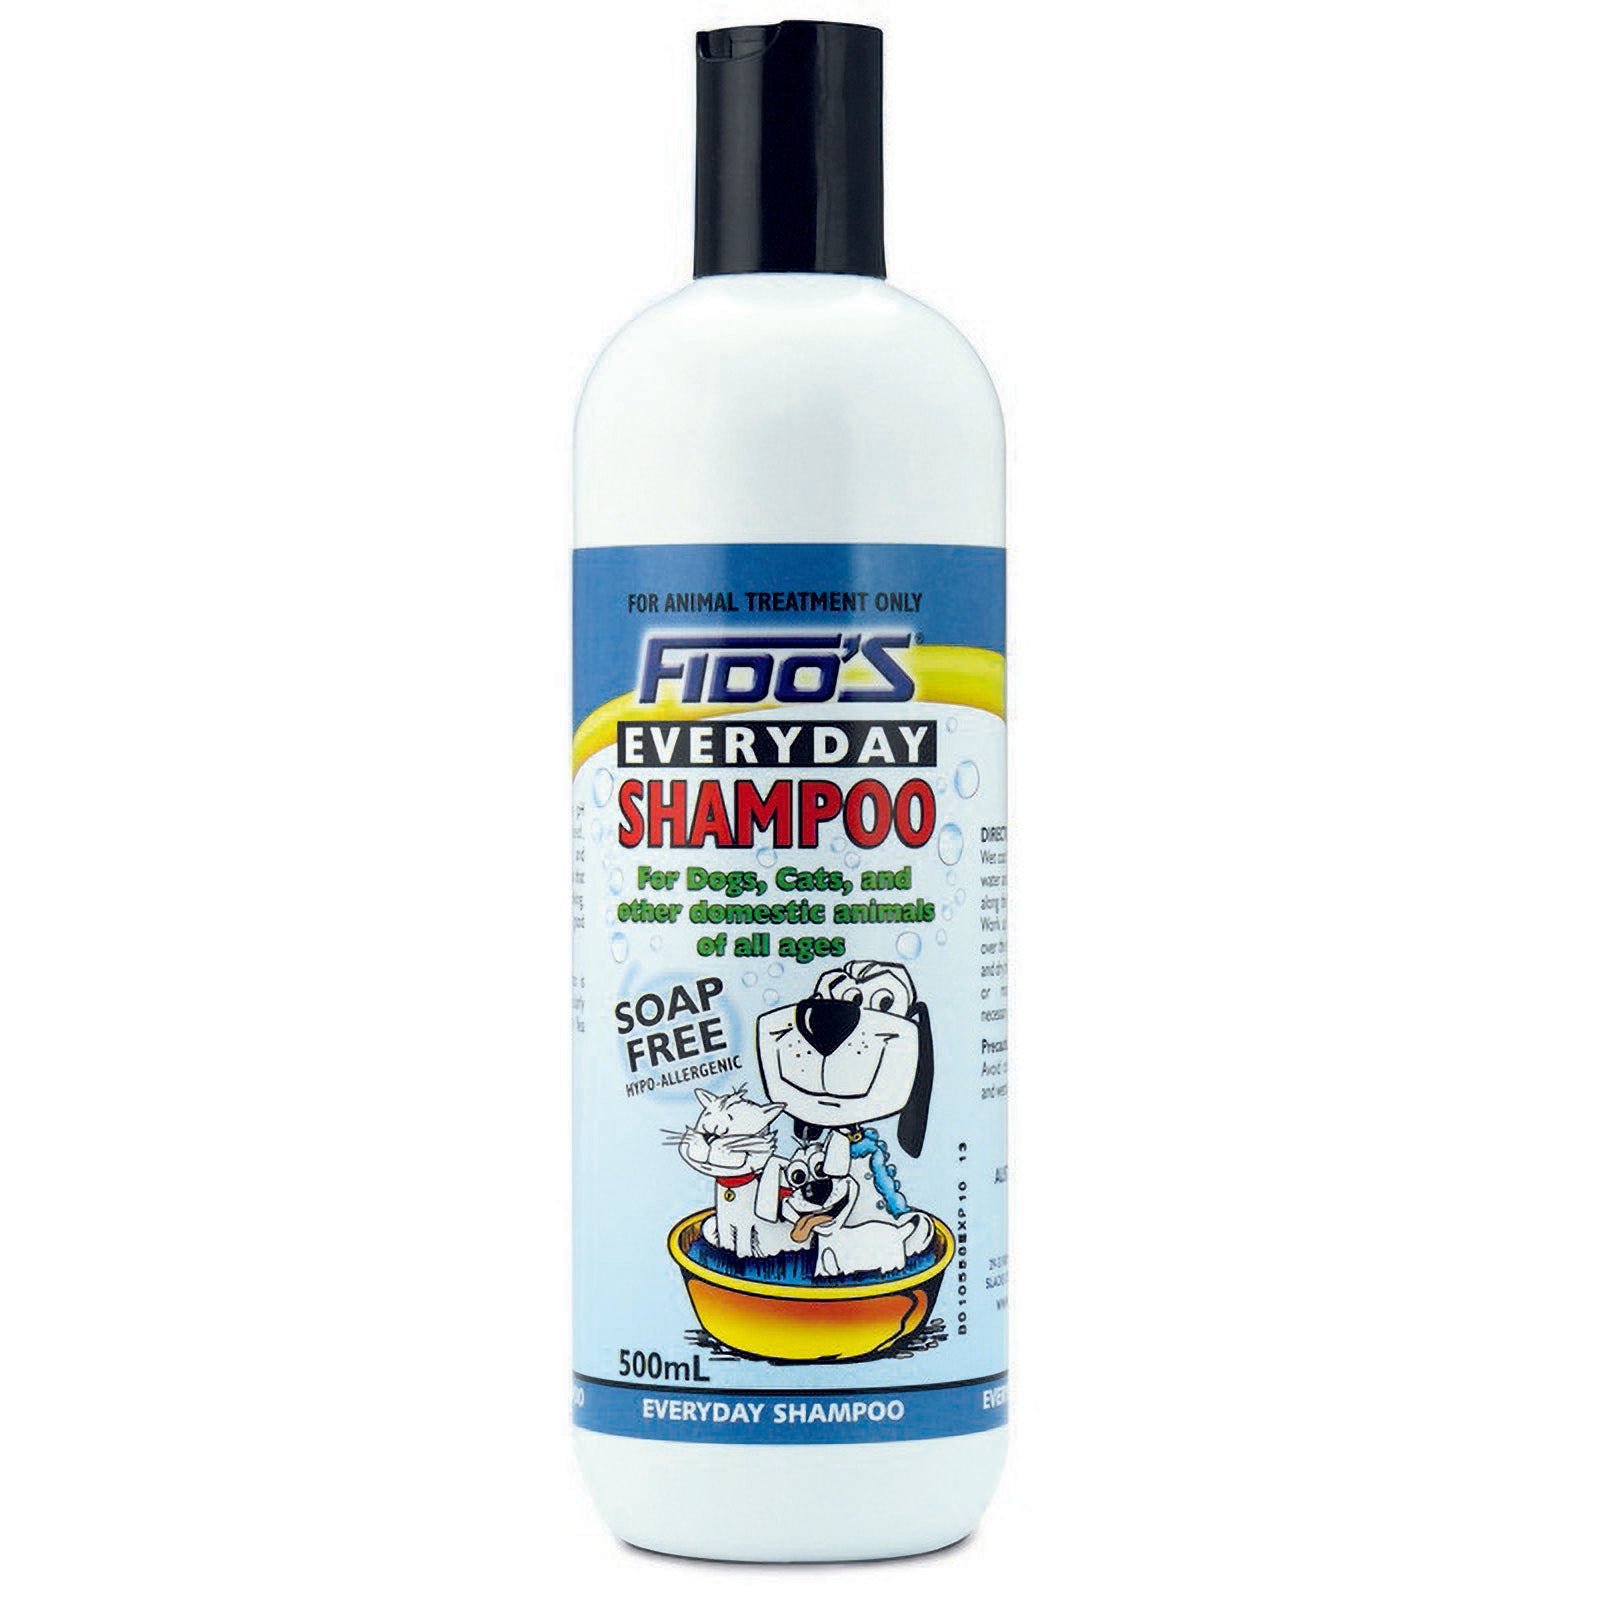 Fido's Everyday Shampoo for Dogs & Cats